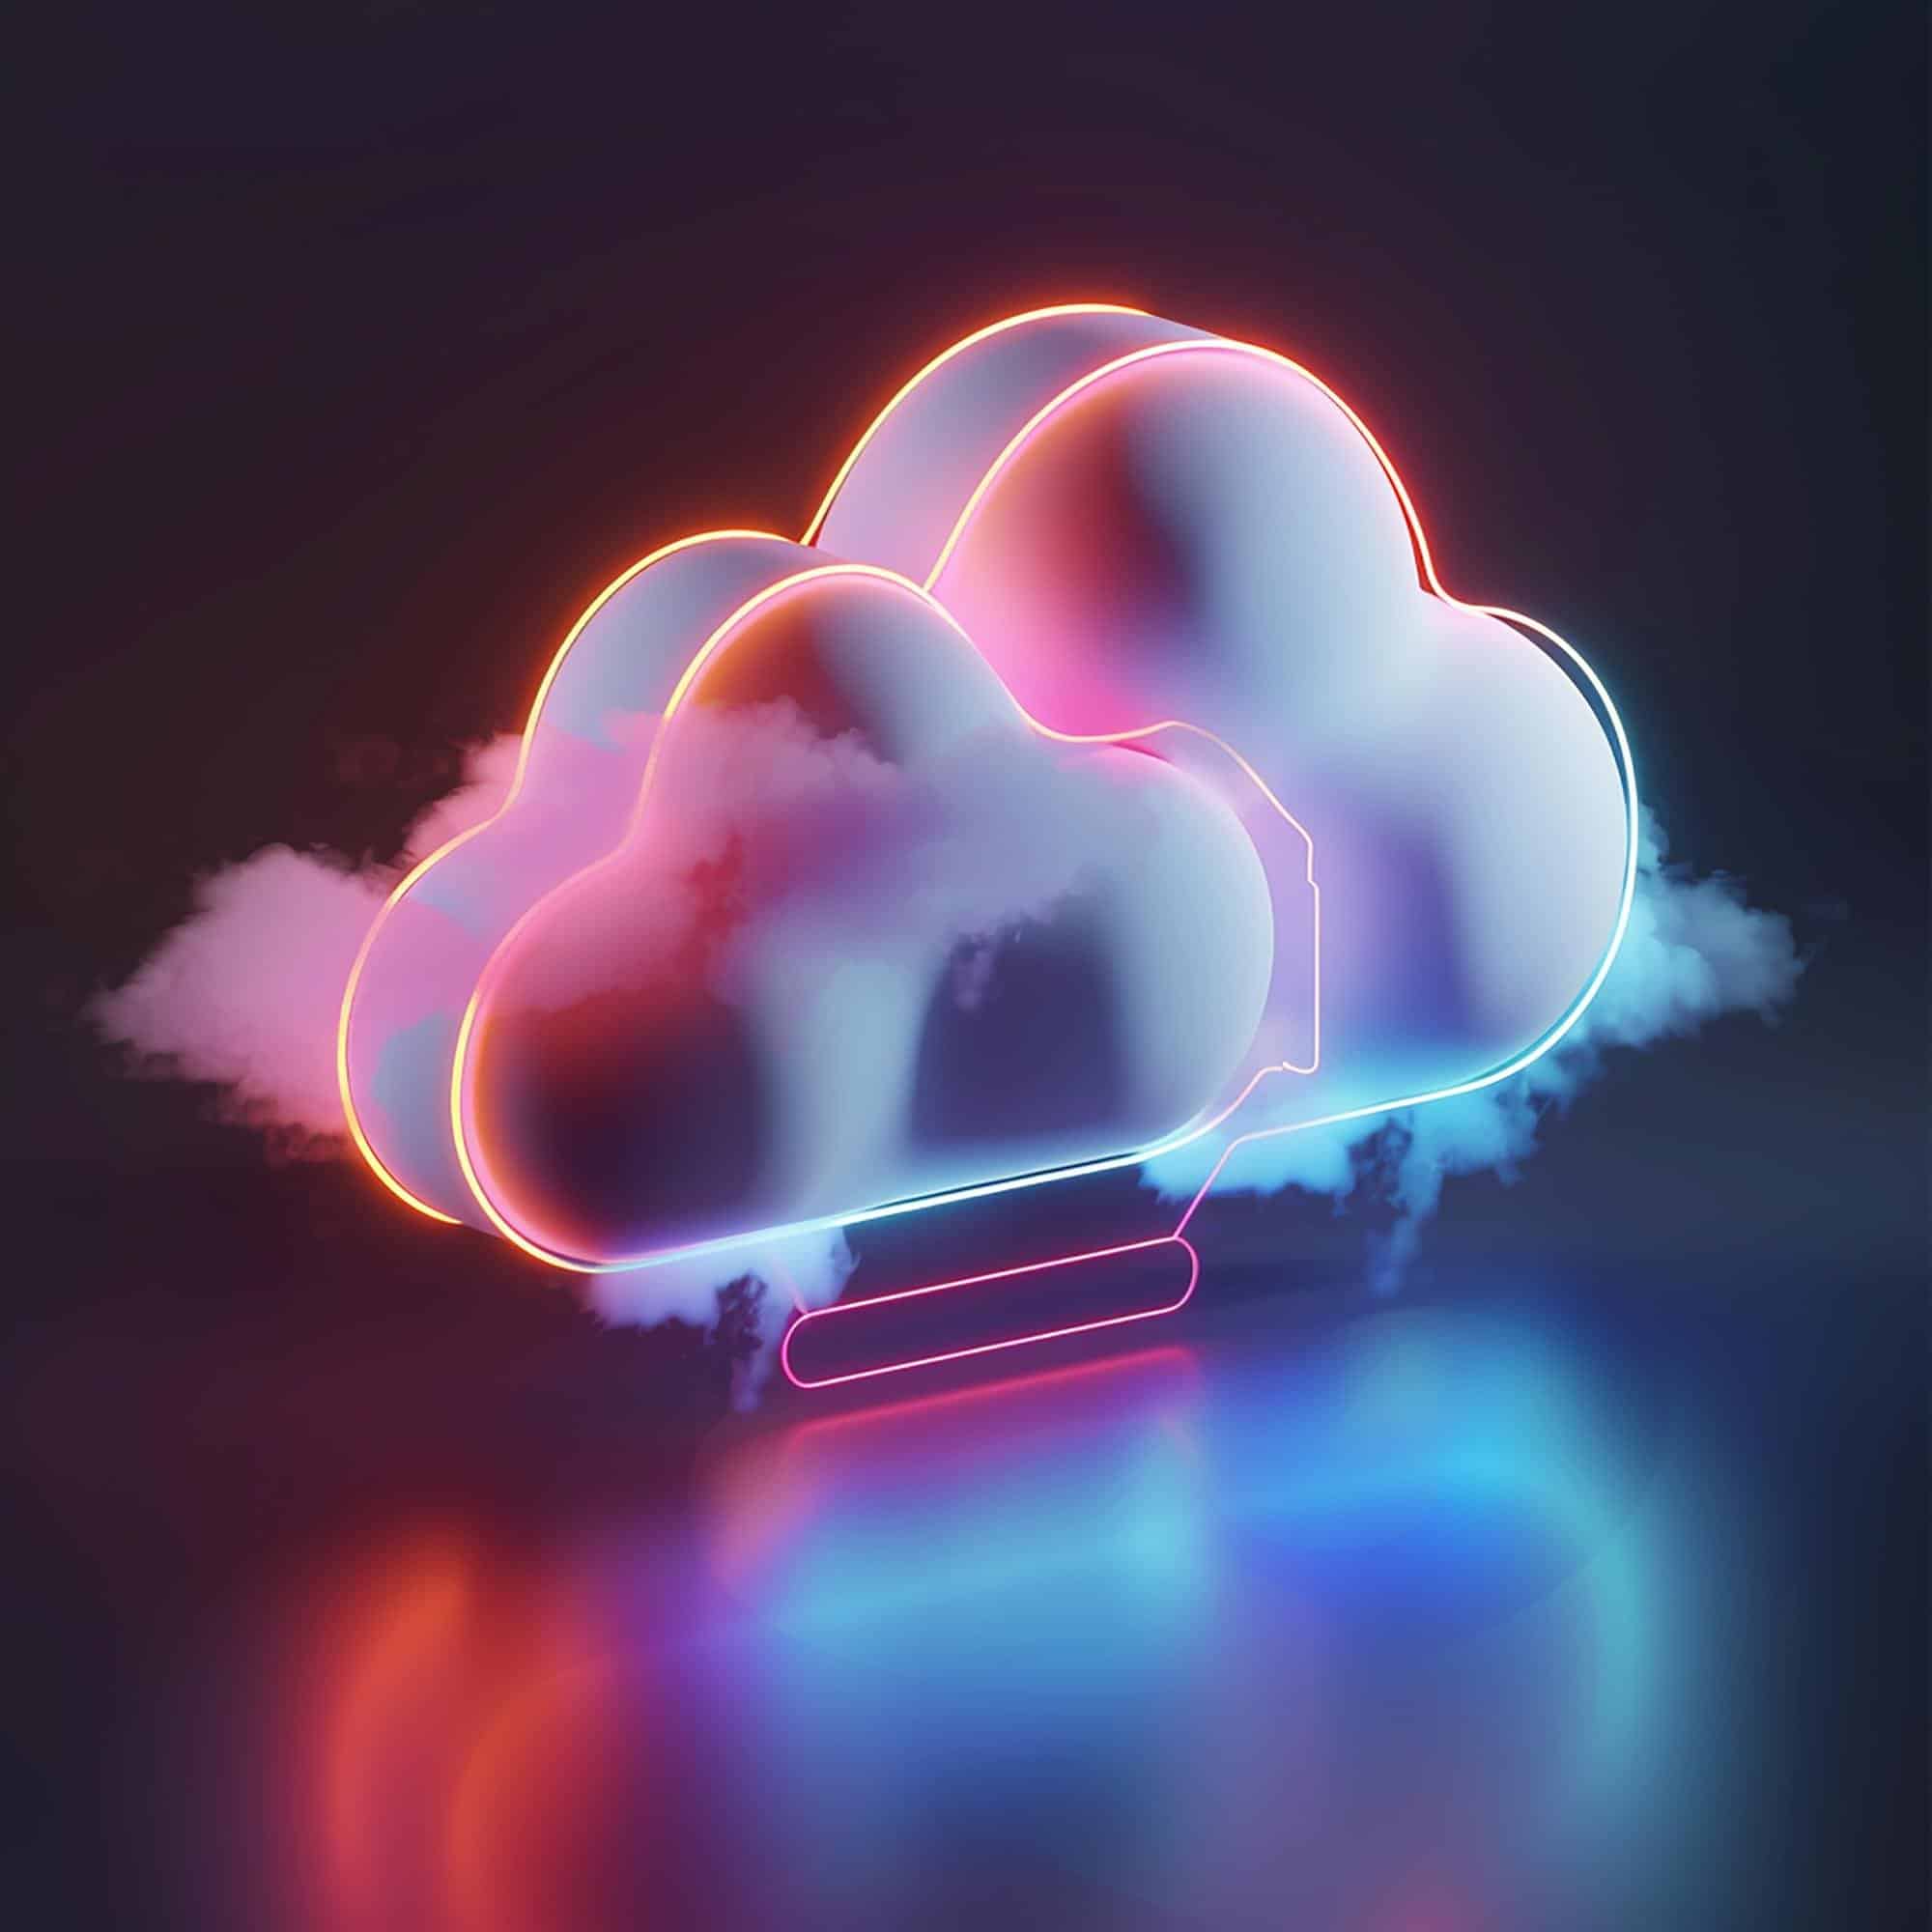 How to Backup Your Data in the Cloud